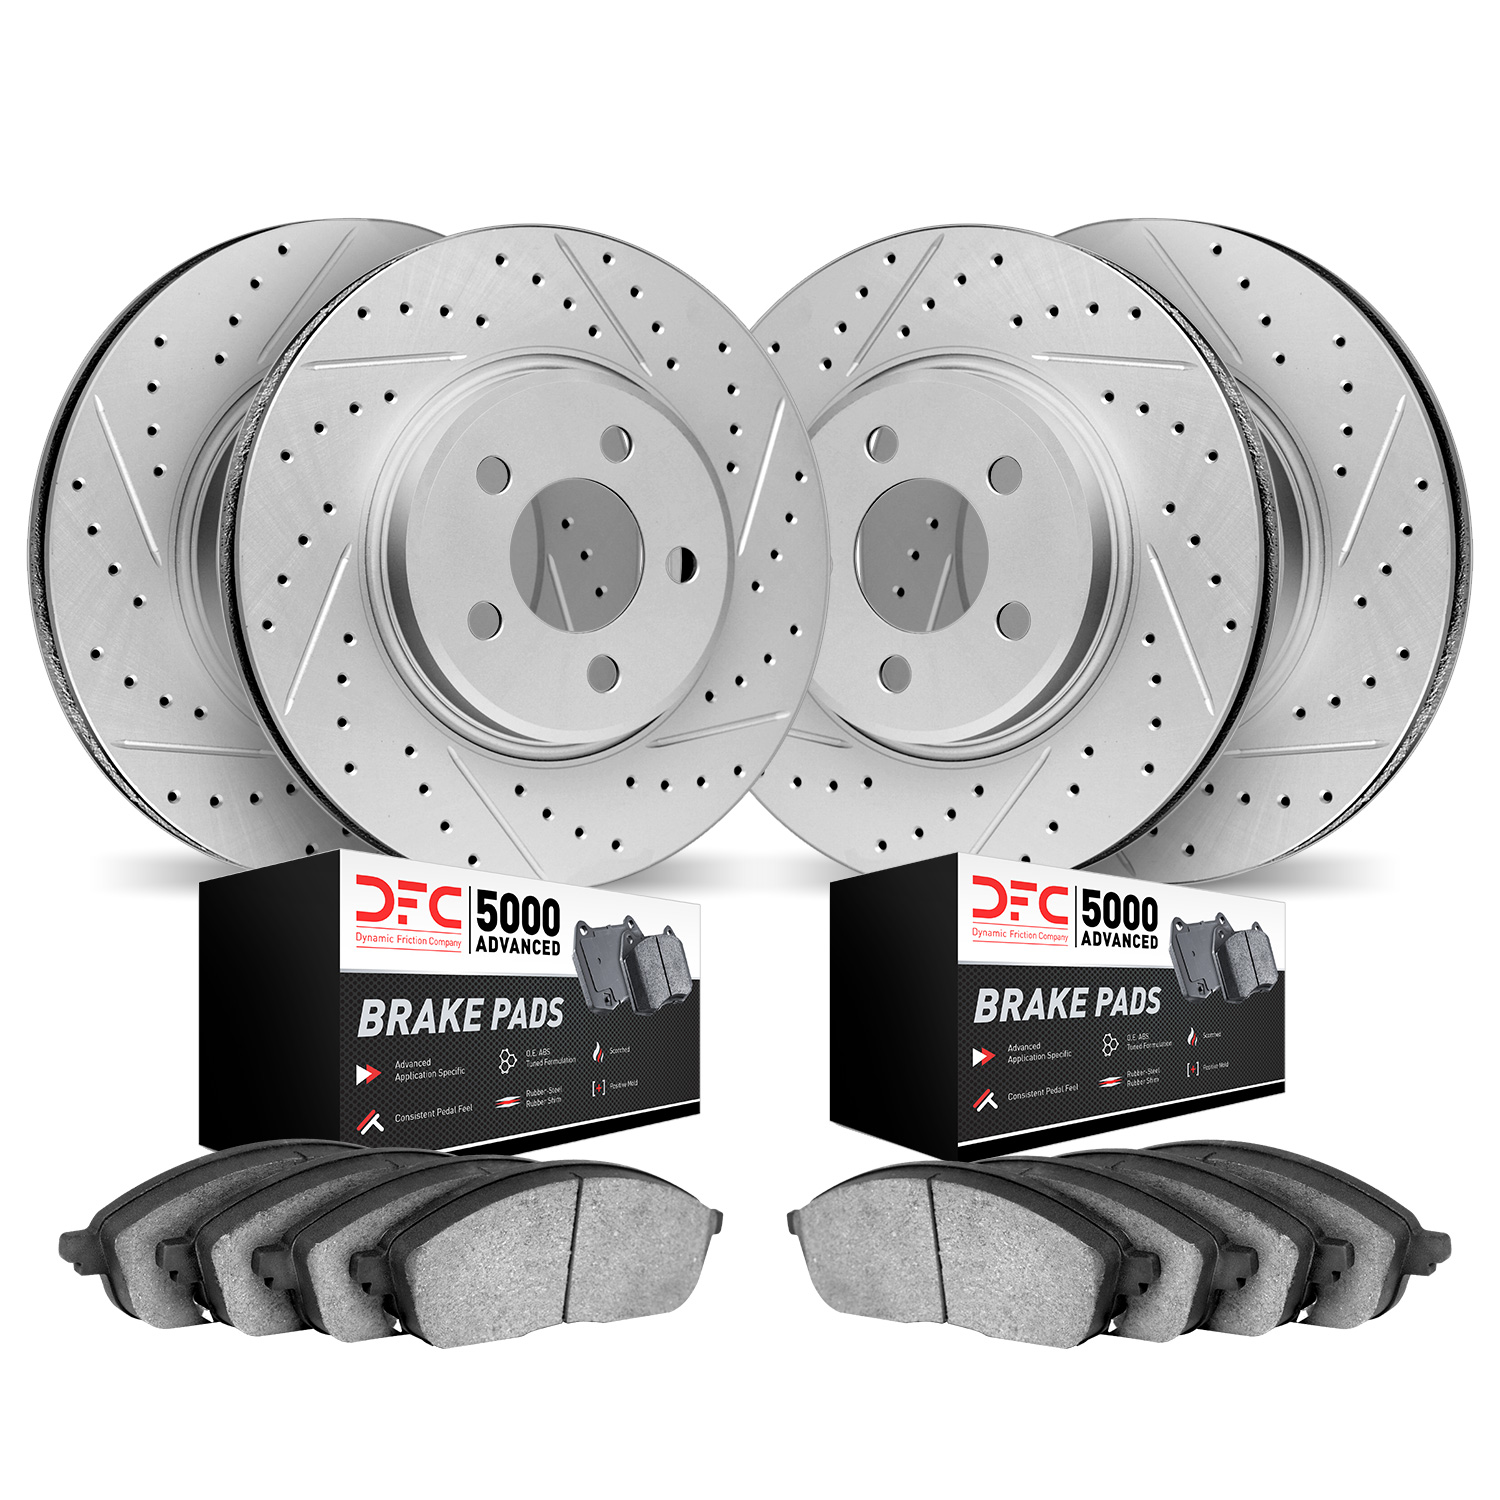 2504-46037 Geoperformance Drilled/Slotted Rotors w/5000 Advanced Brake Pads Kit, 2016-2019 GM, Position: Front and Rear